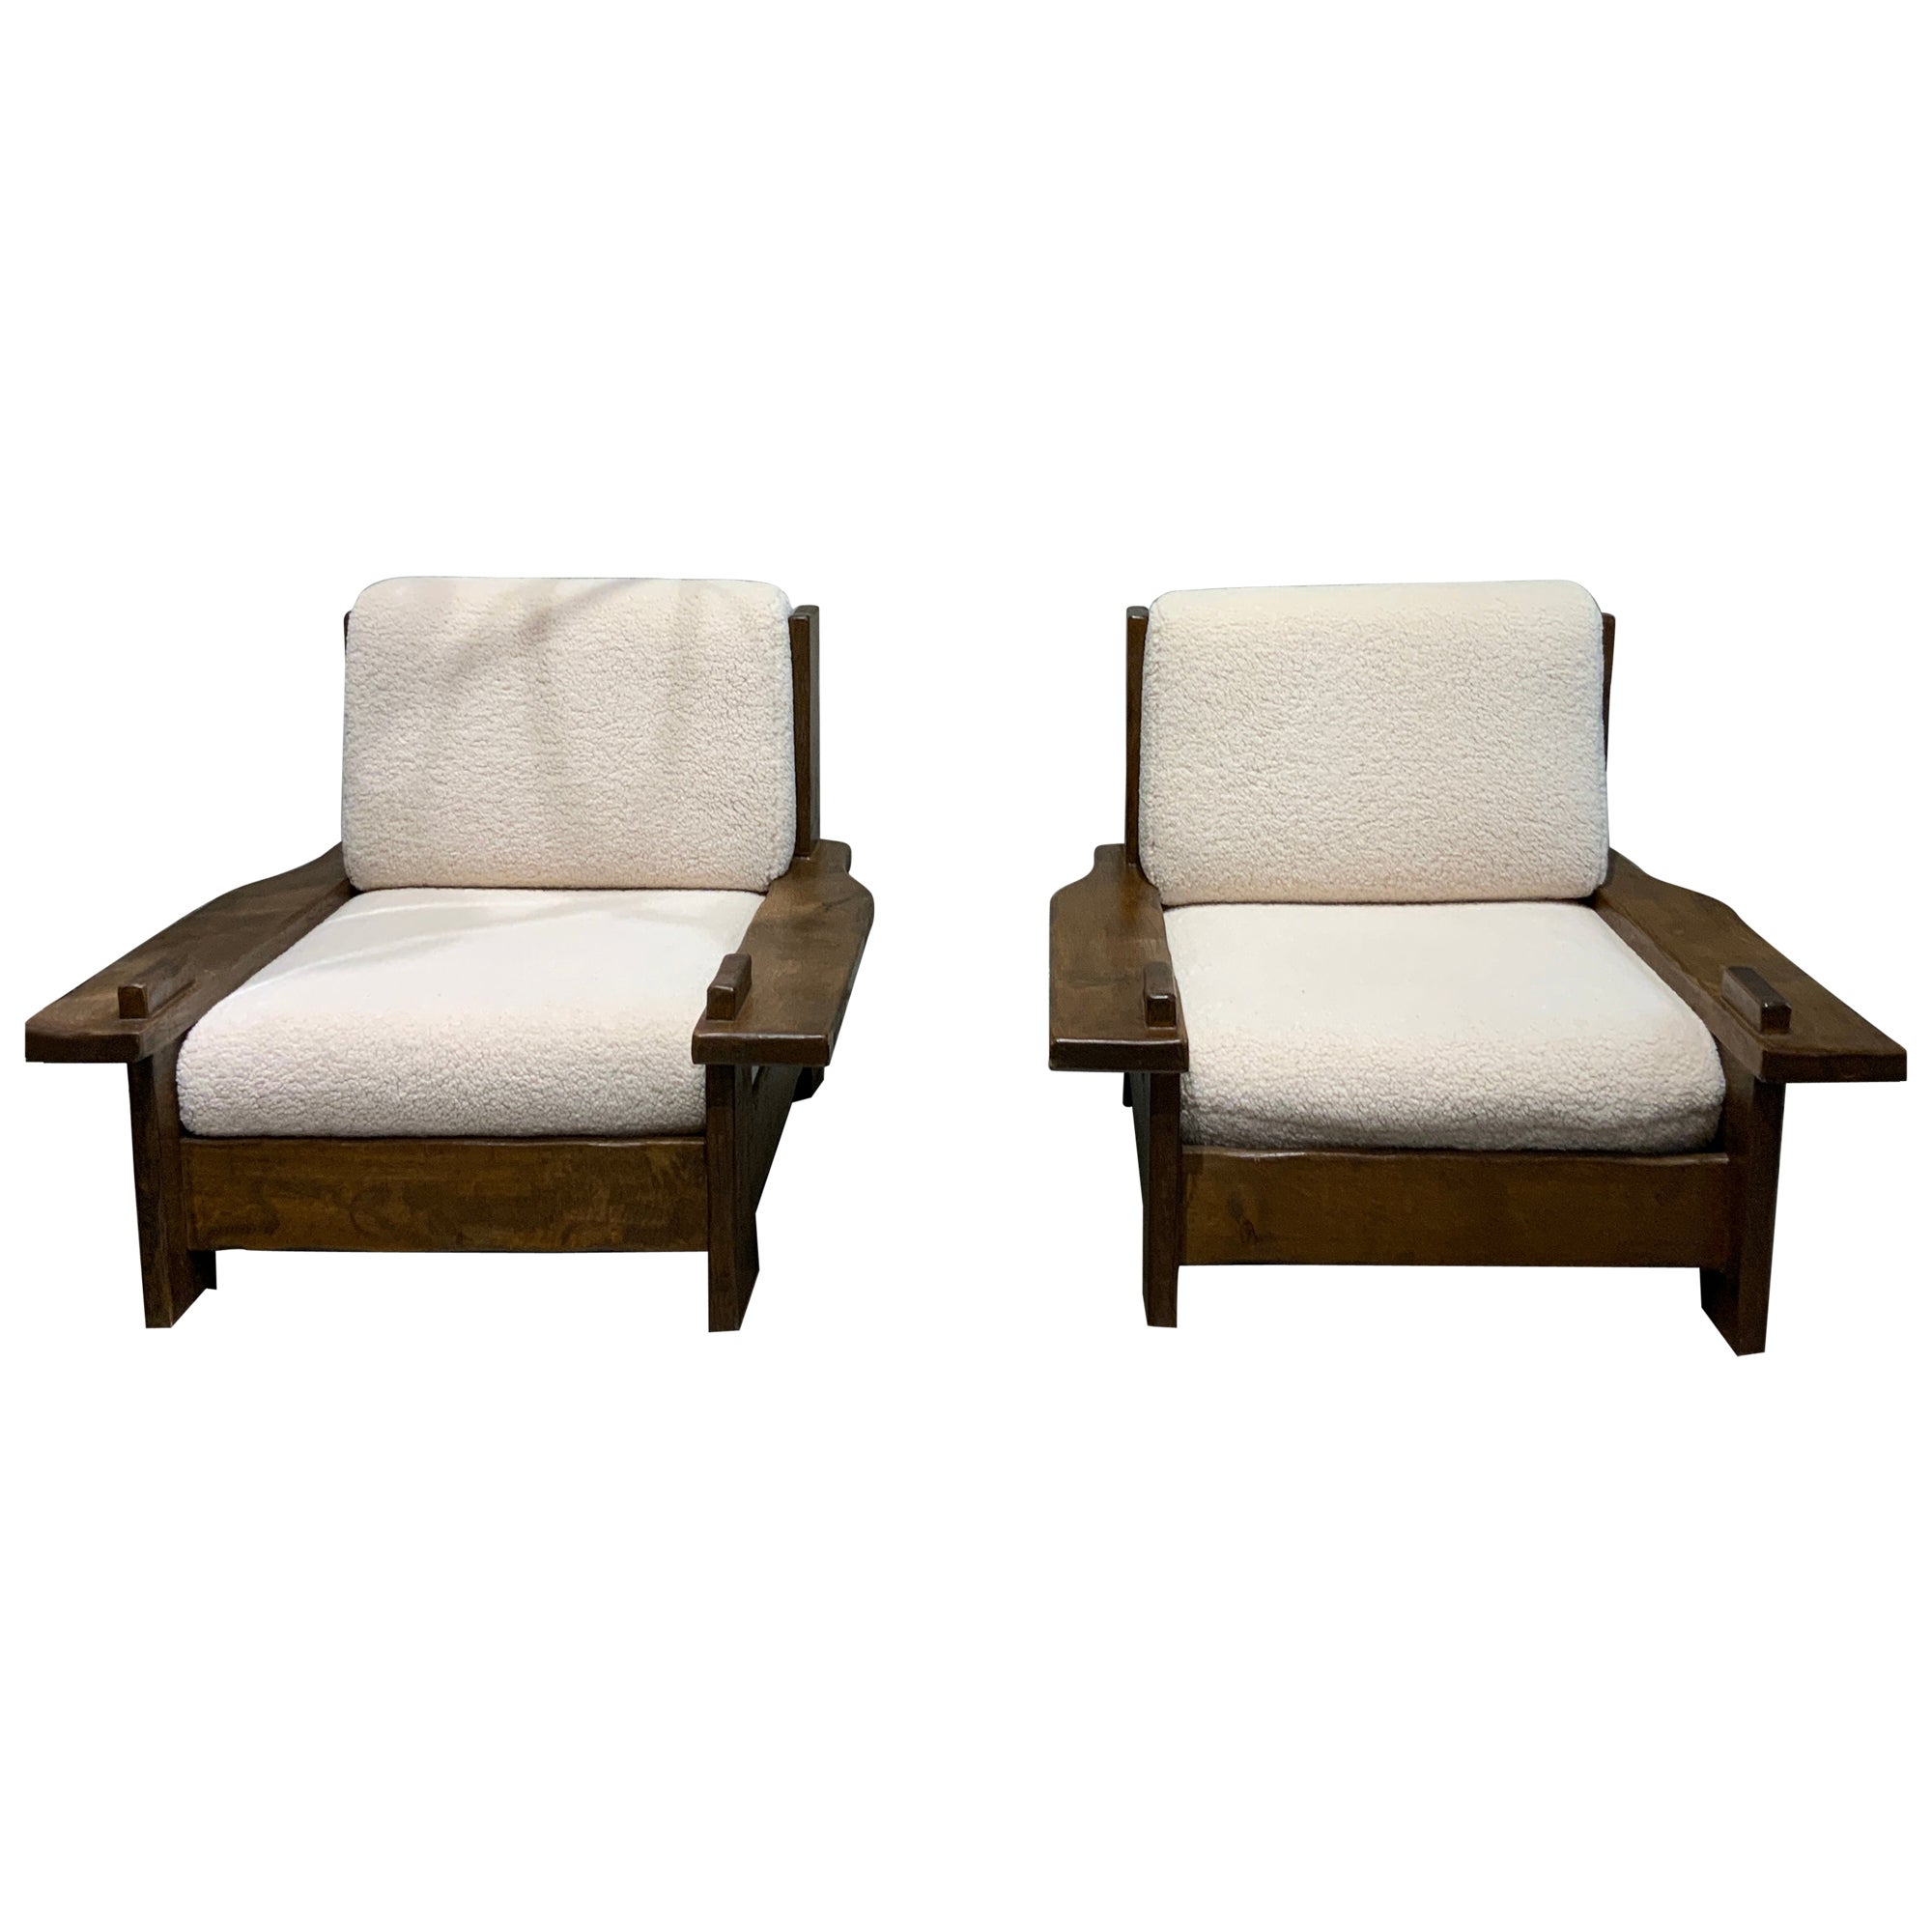 Impressive pair of brutalist lounge chairs France circa 1970